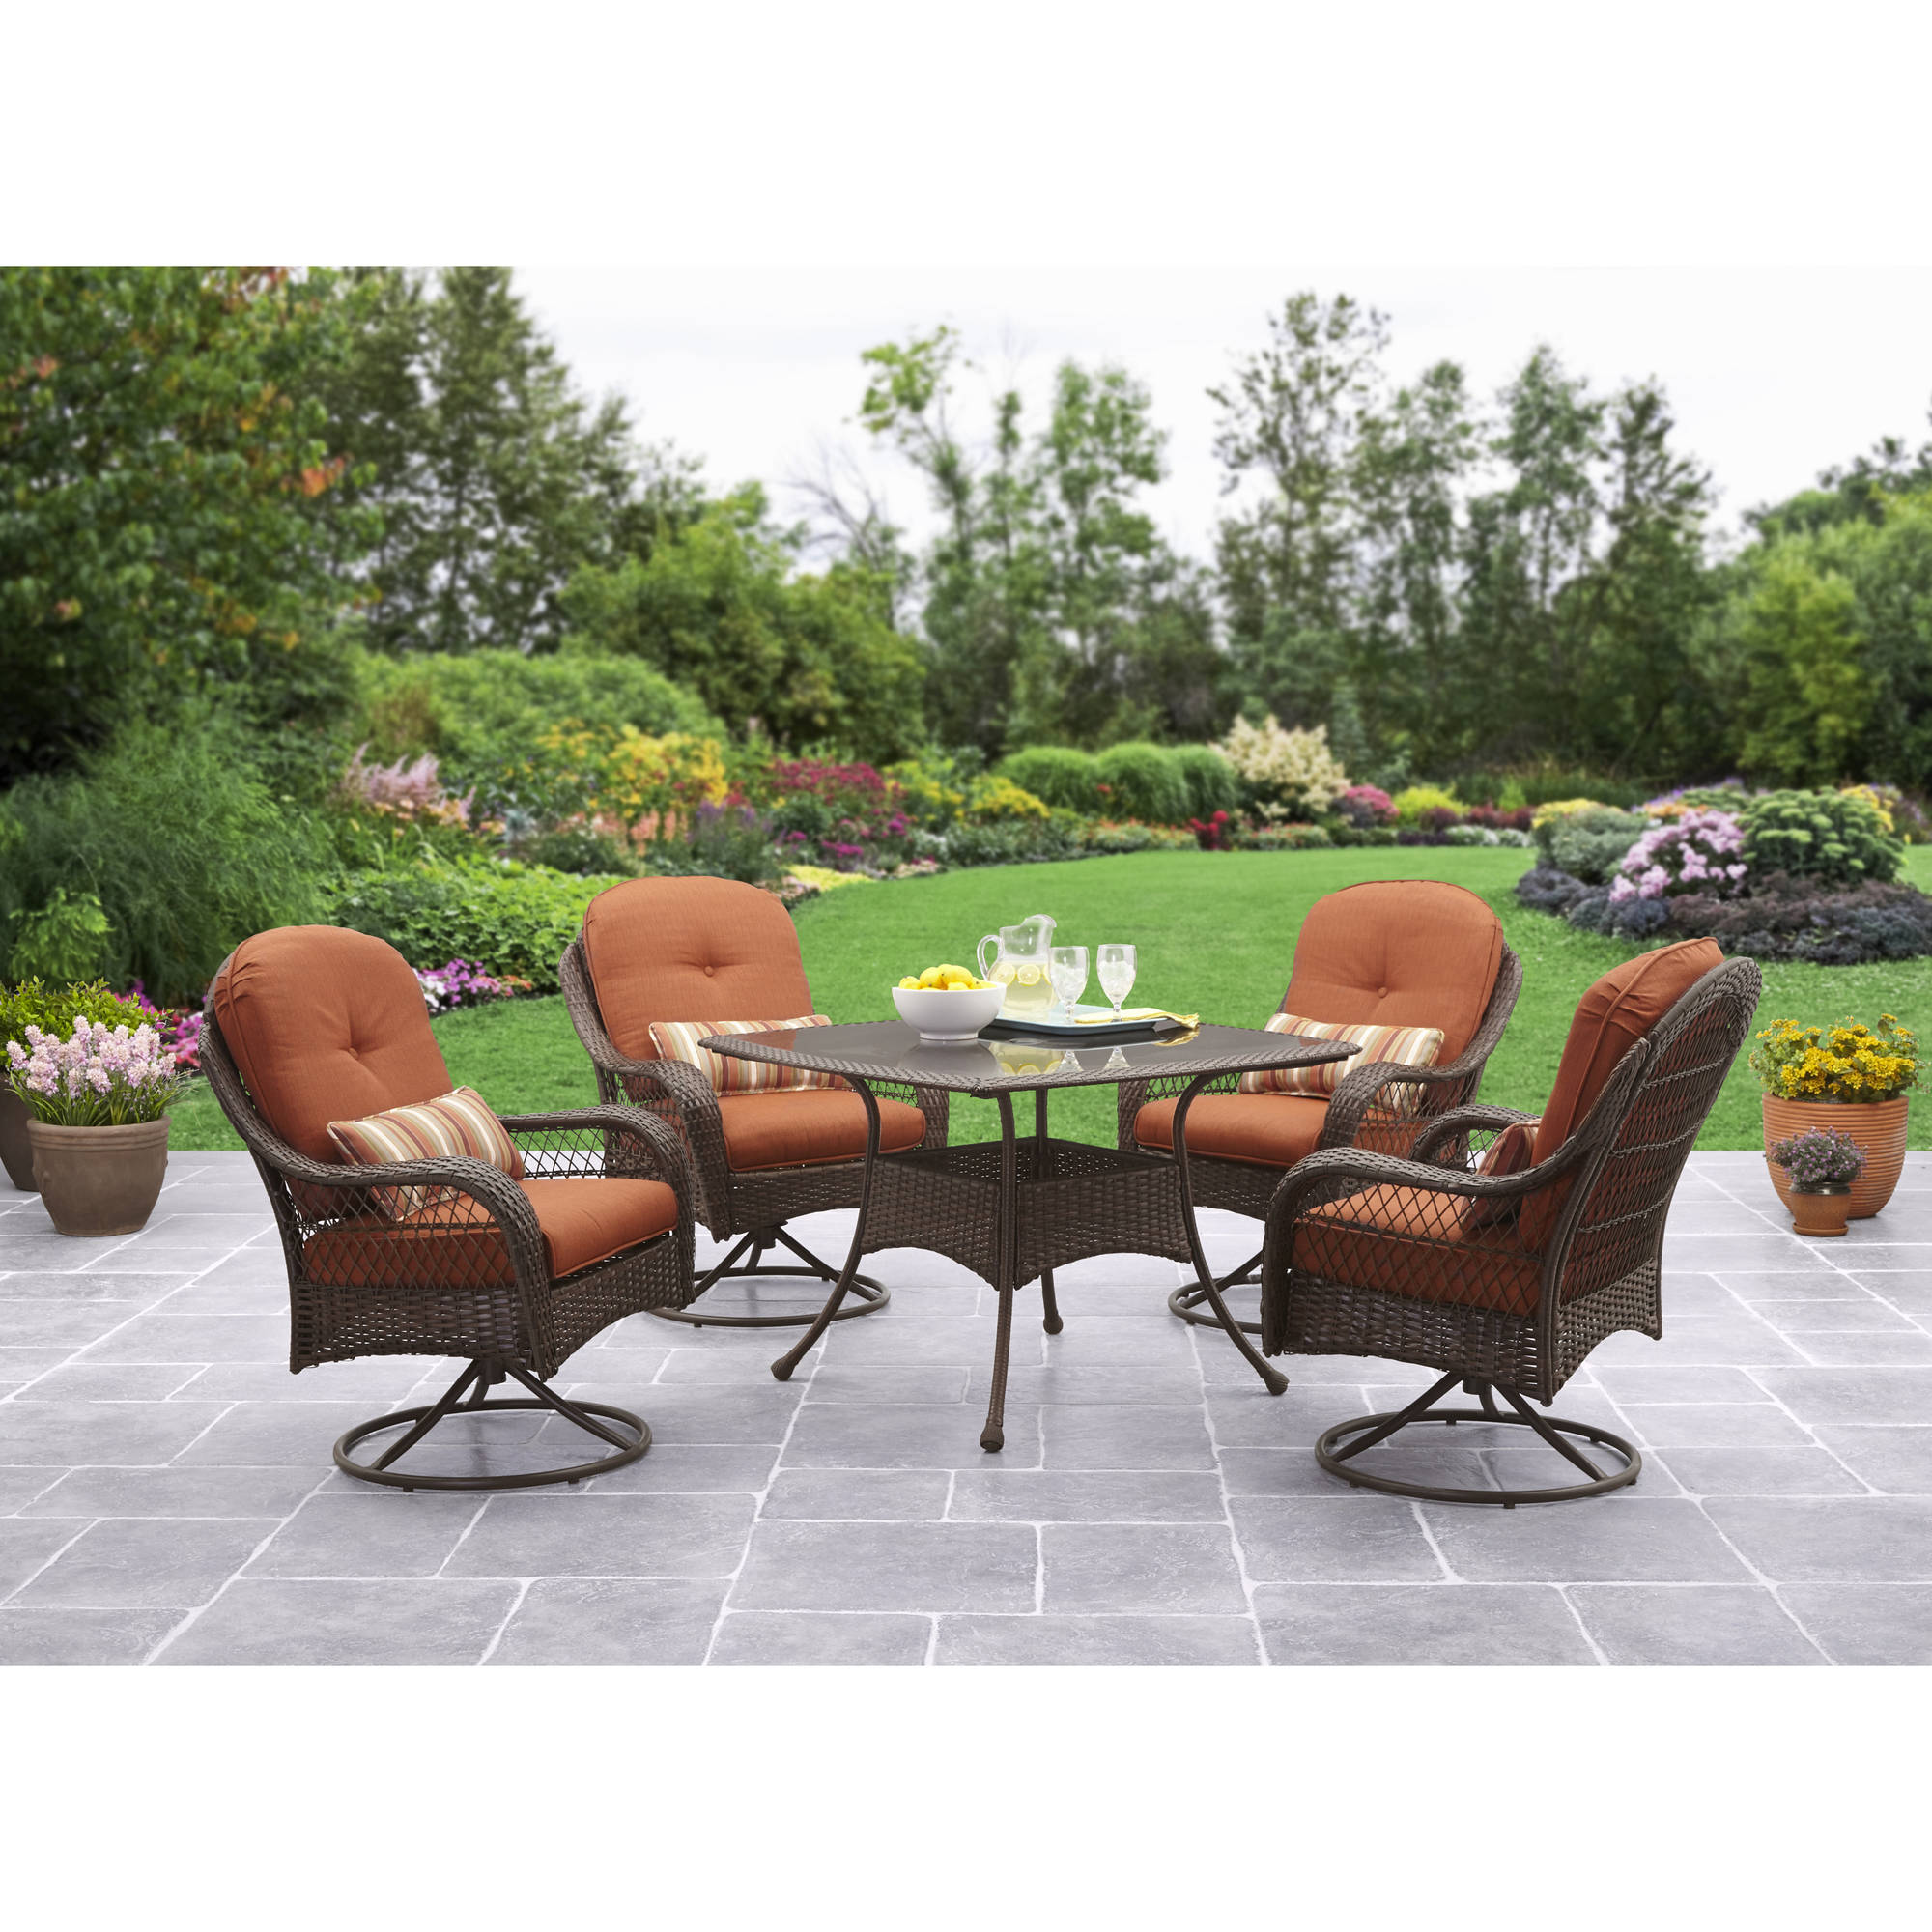 Better Homes and Gardens Azalea Ridge Patio Dining Set, Outdoor Wicker Cushioned 5 Piece - image 1 of 15